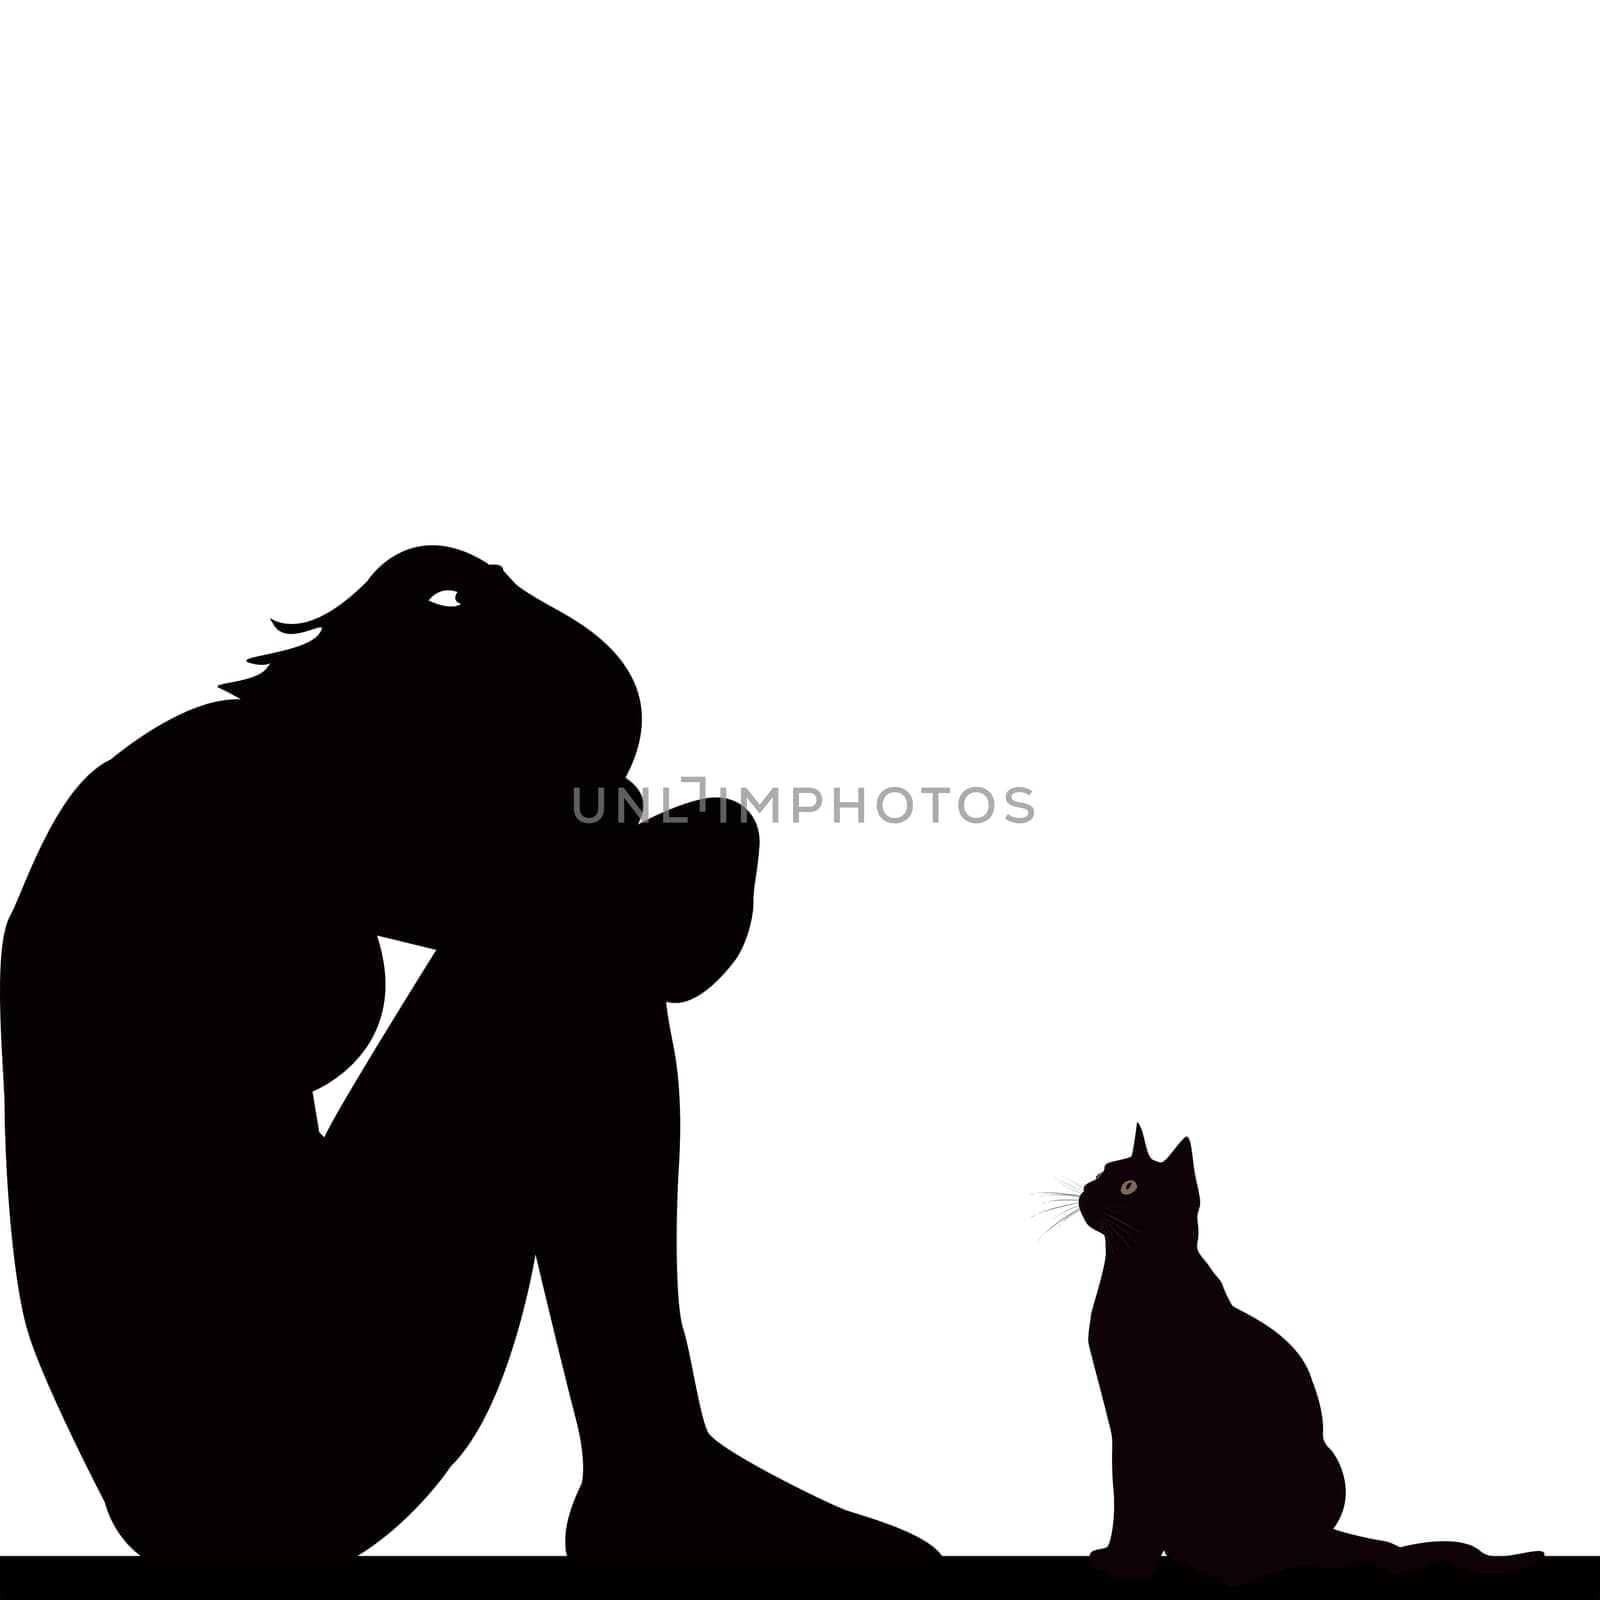 Sad woman silhouette with cat by hibrida13